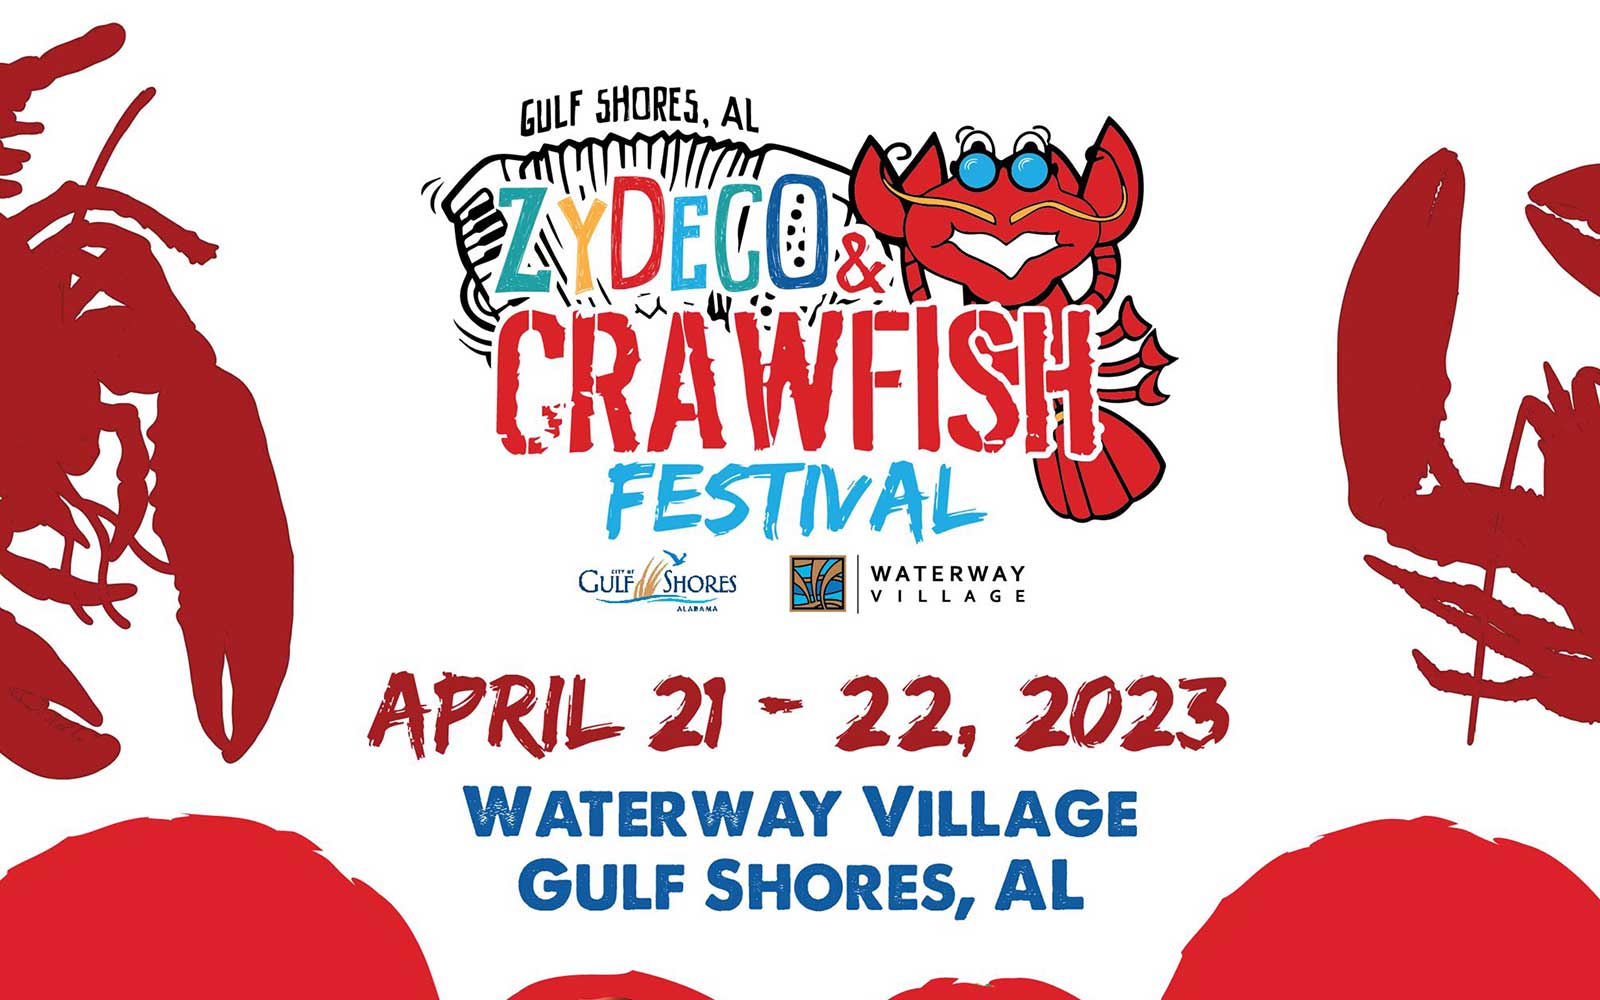 Gulf Shores Zydeco, Crawfish Festival Coming Up